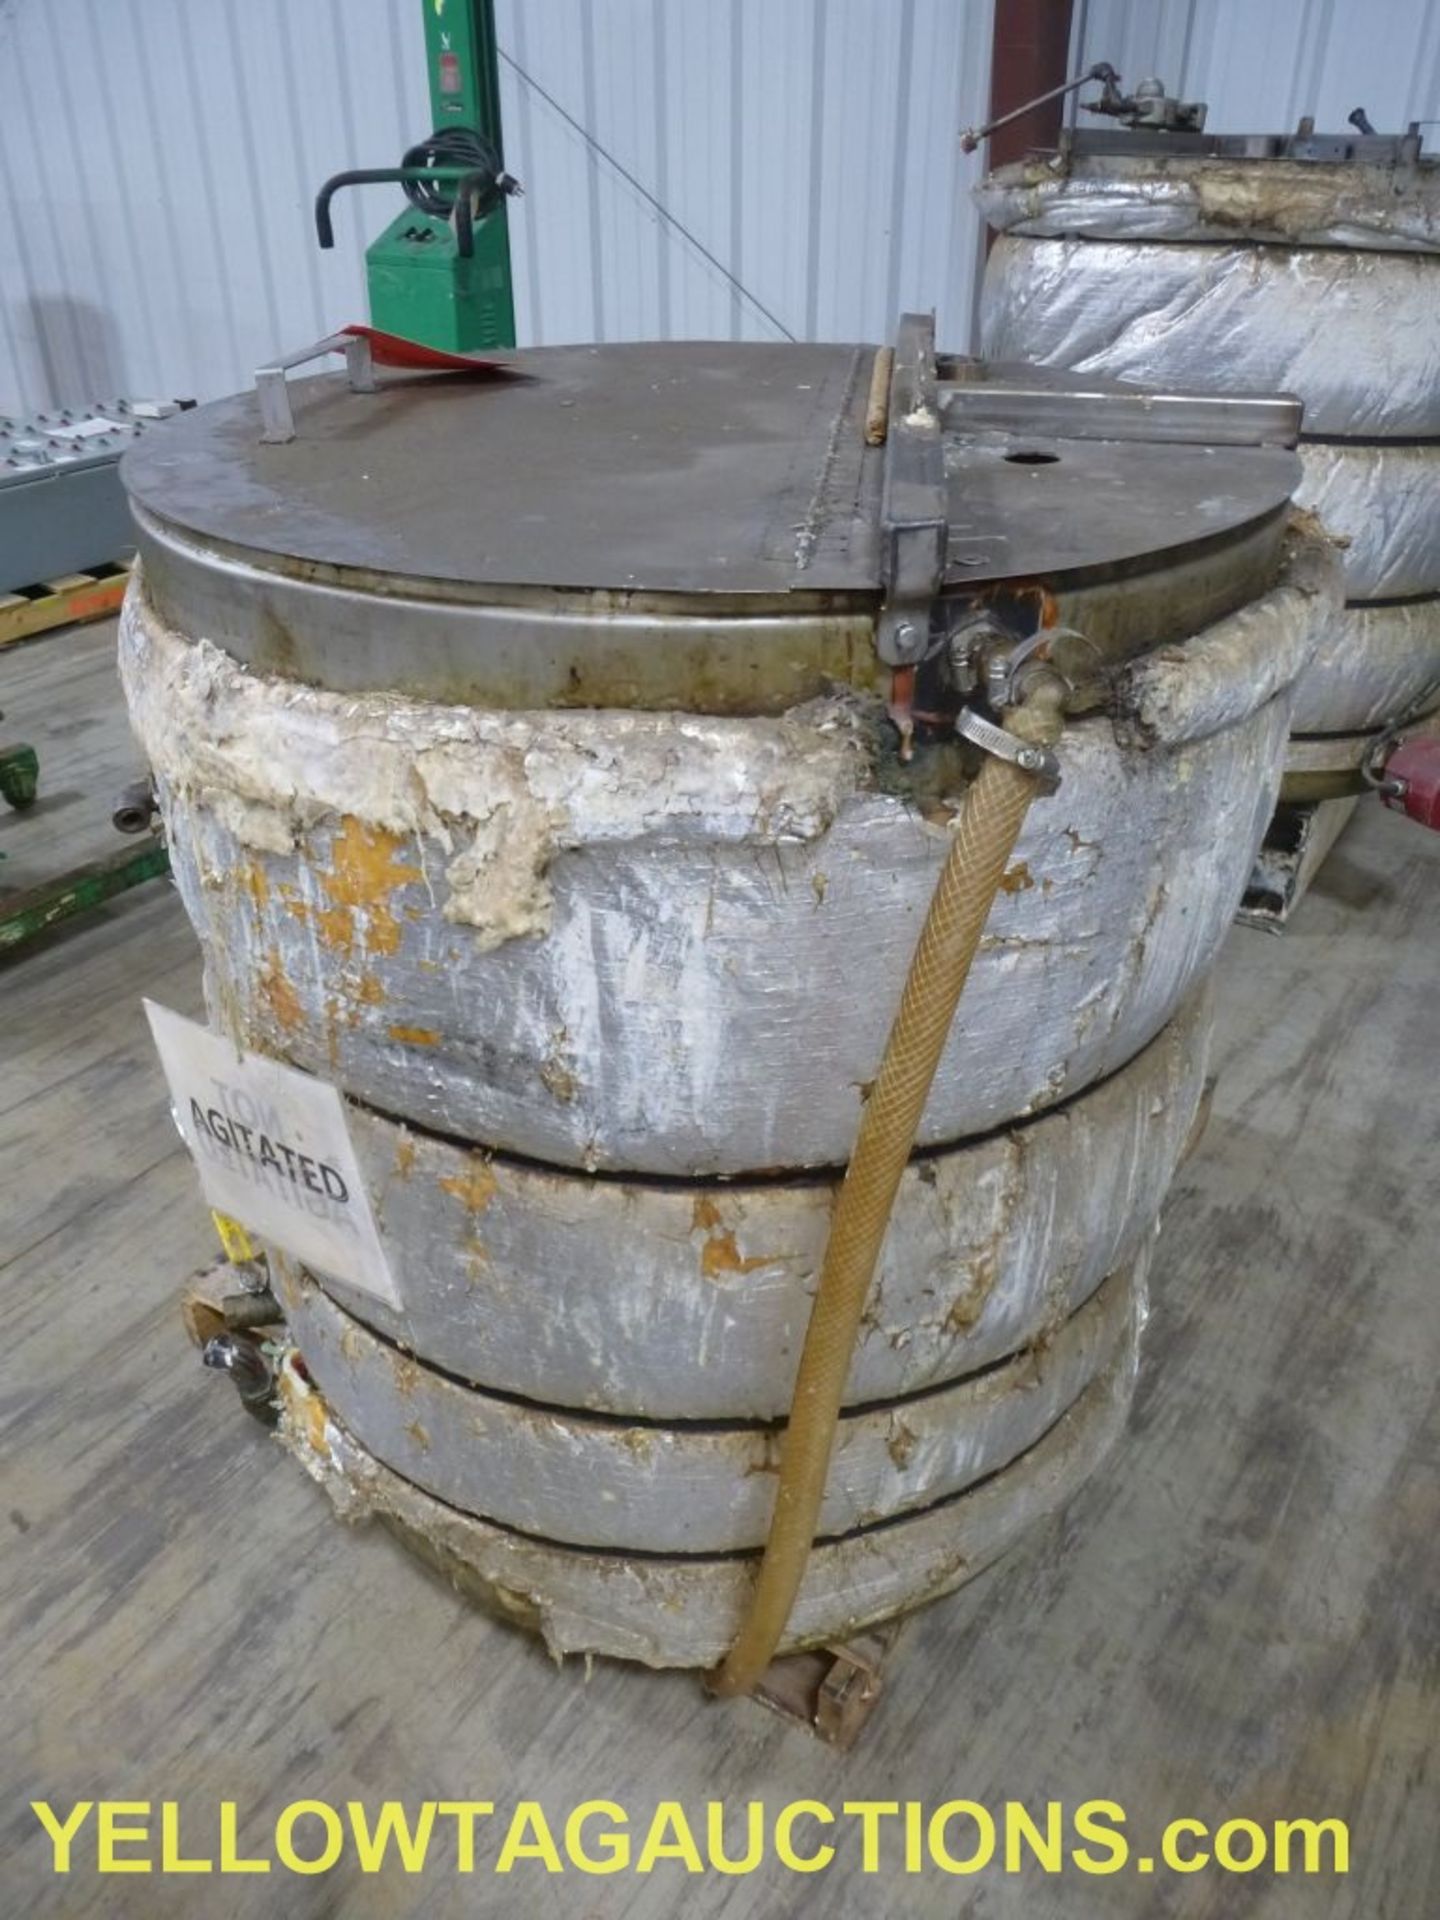 Stainless Steel Jacketed Melting Pot|Lot Loading Fee: $5.00